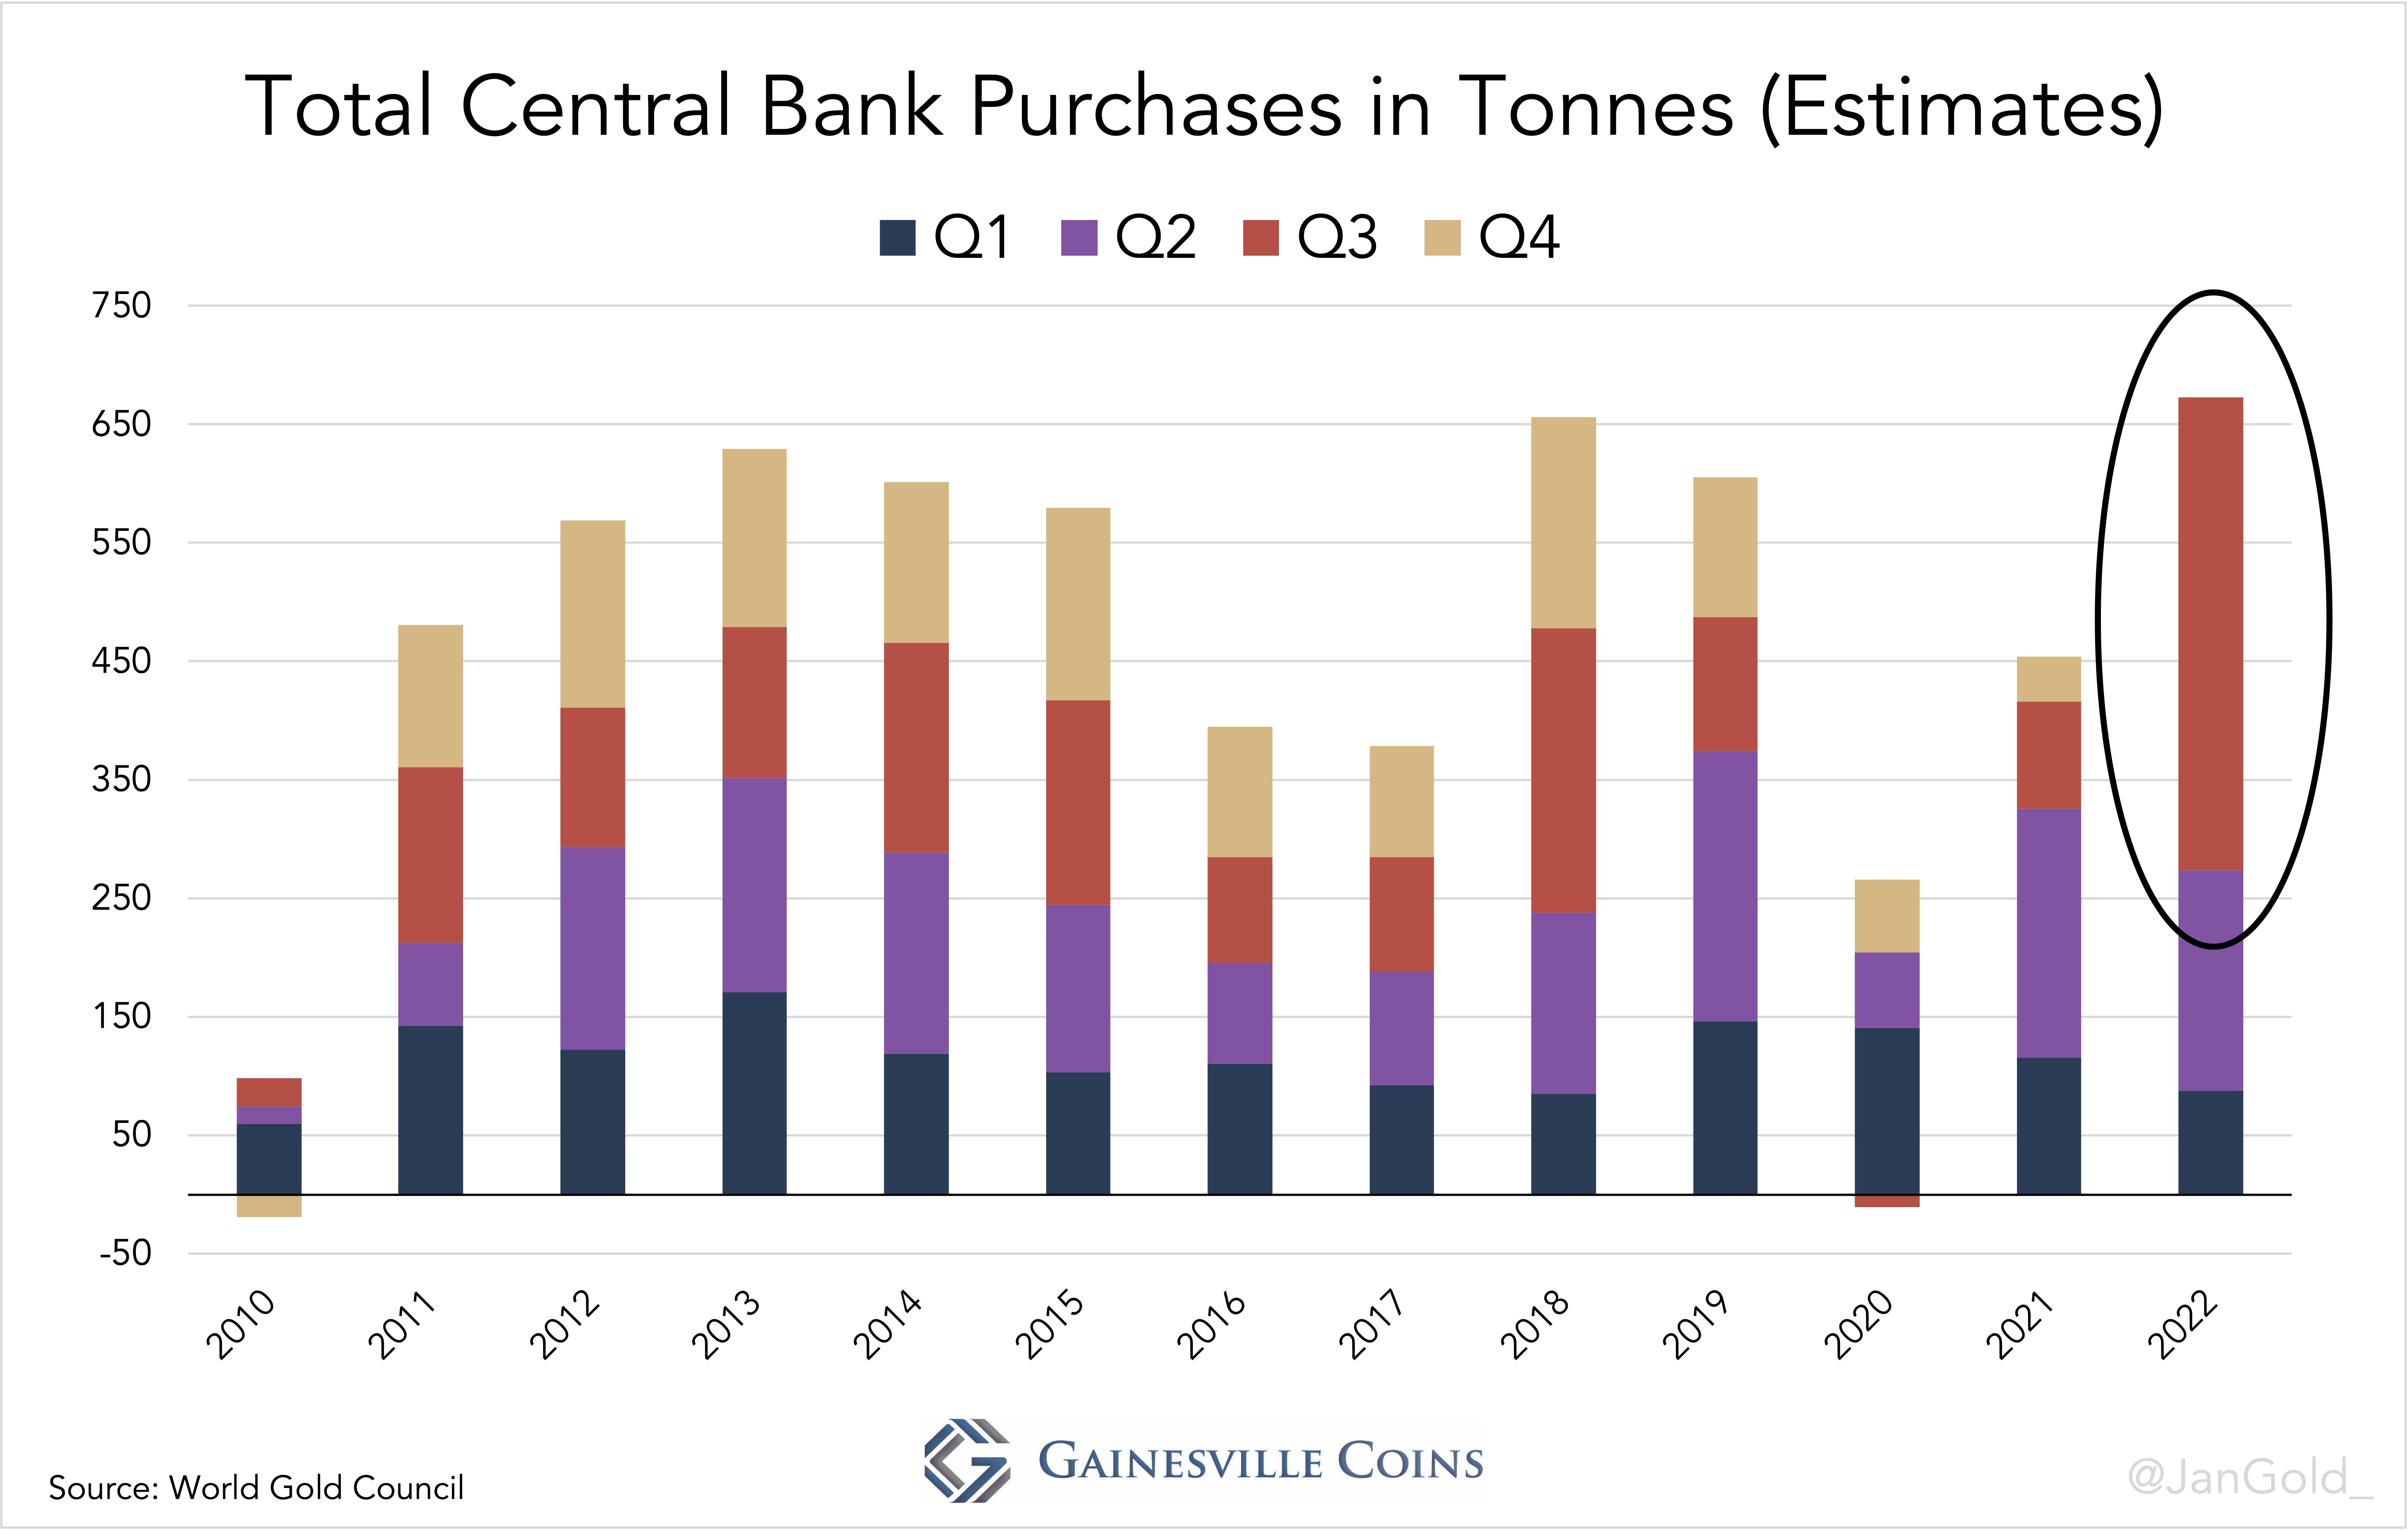 Total Central Bank Purchases in Tonnes